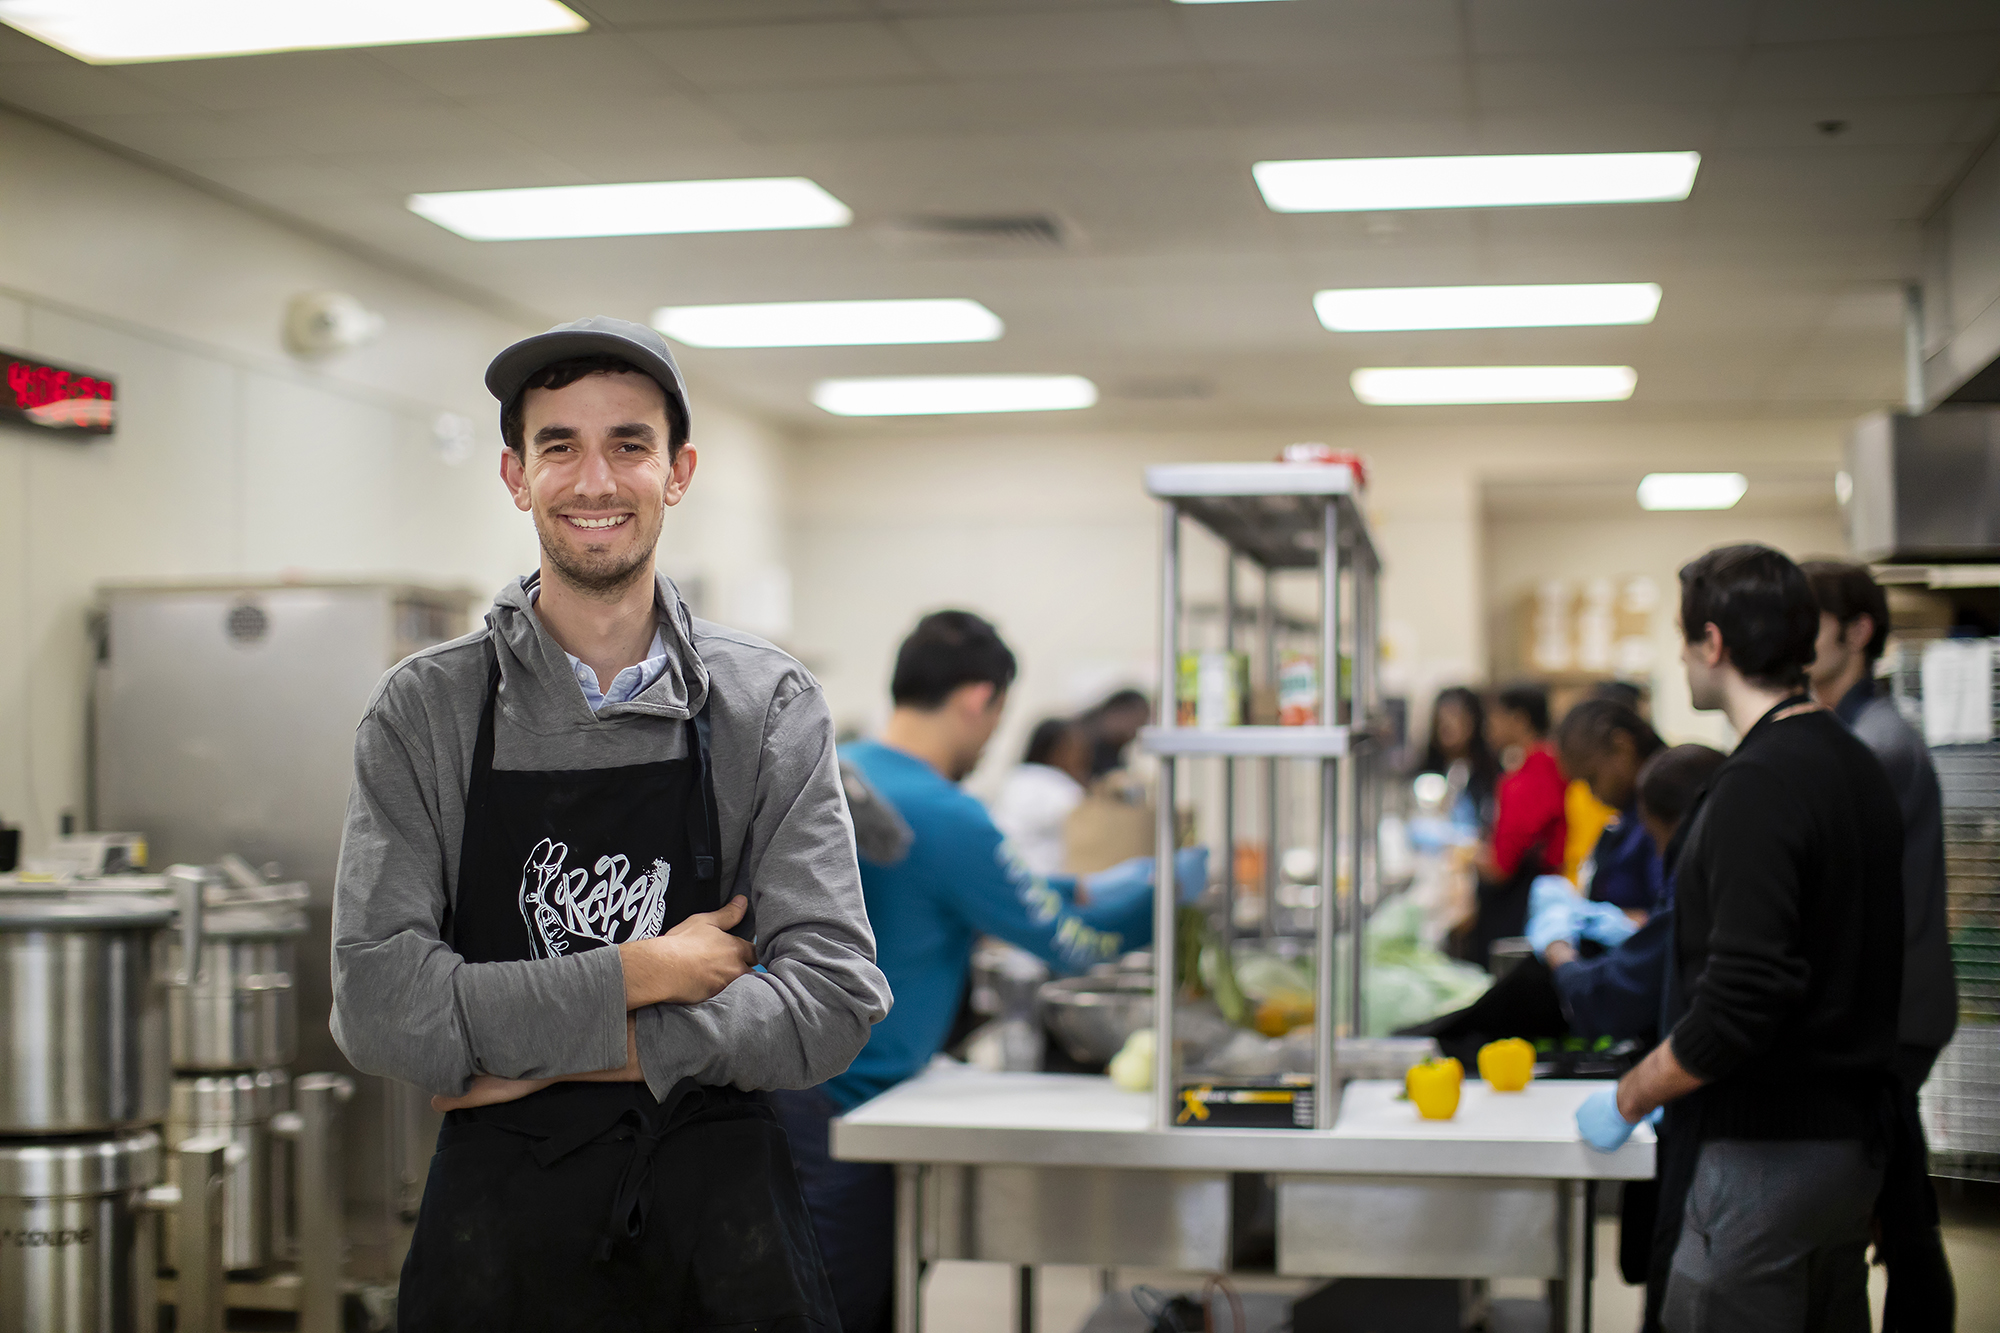 Jarrett Stein stands in front of busy workers in a large kitchen